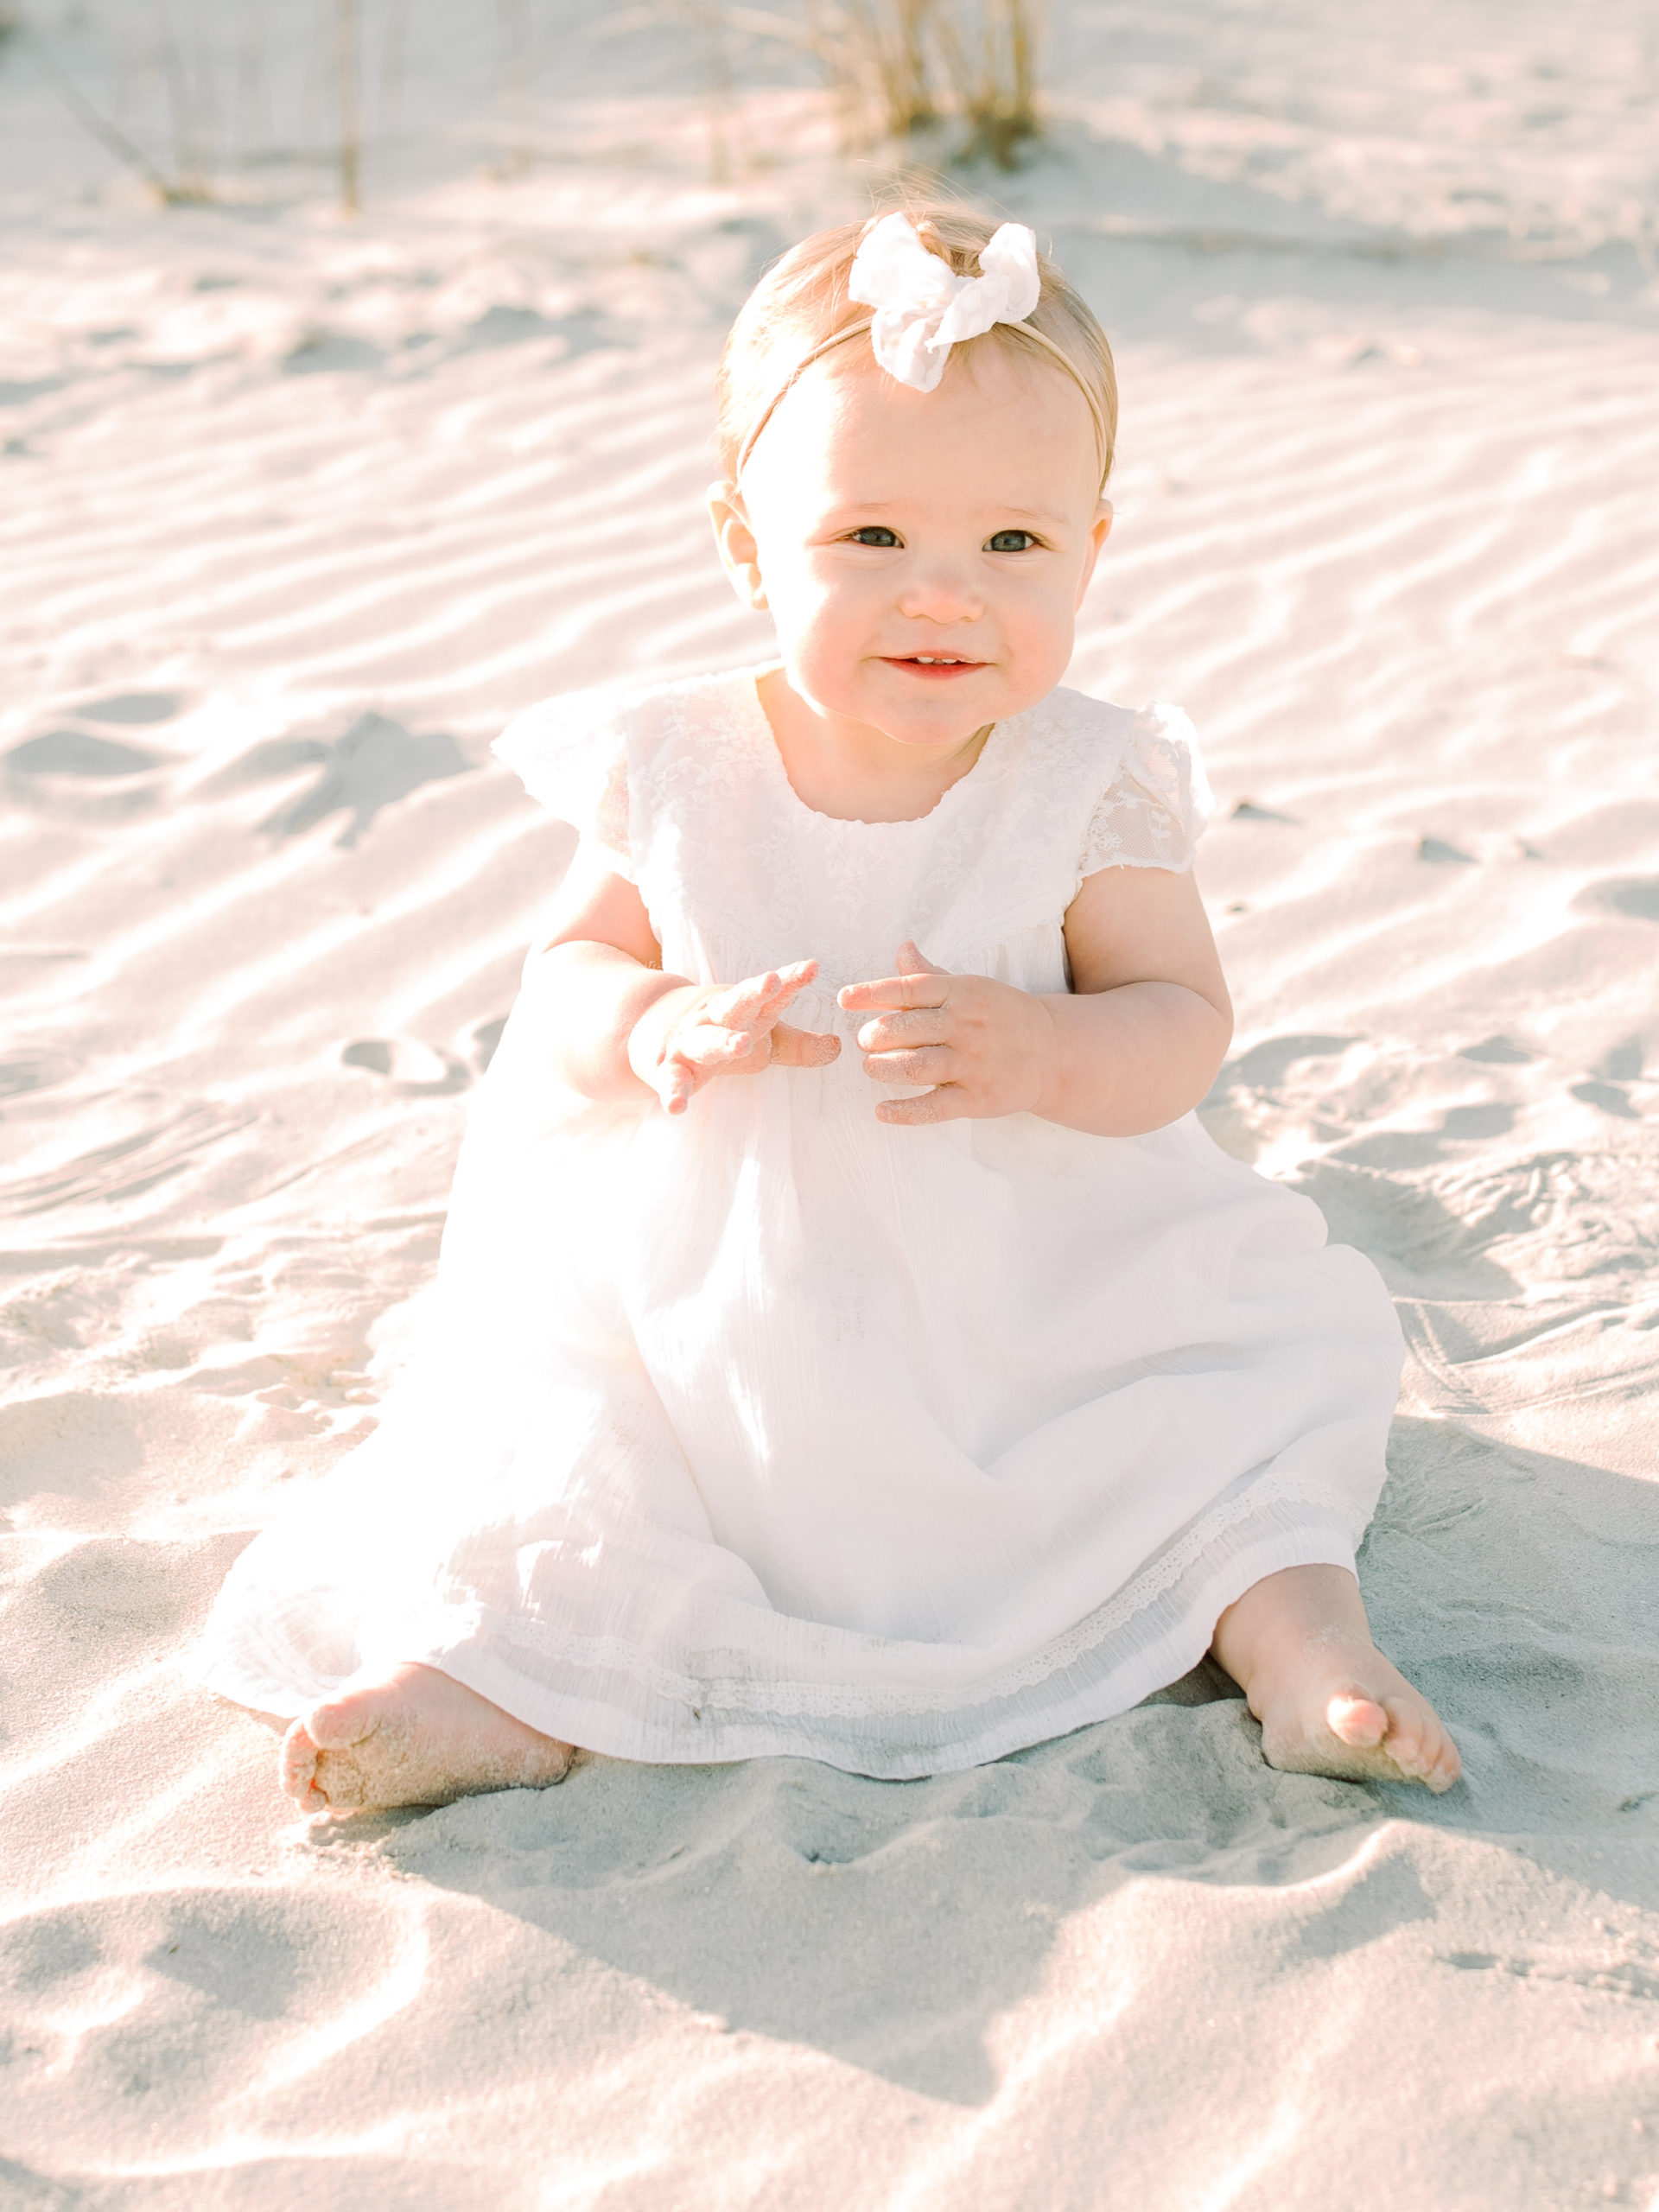 Olivia 11 Months Old - Sweet Williams Photography is a lifestyle, engagement, and wedding photographer serving the Nashville, Tennessee area, and destination locations.